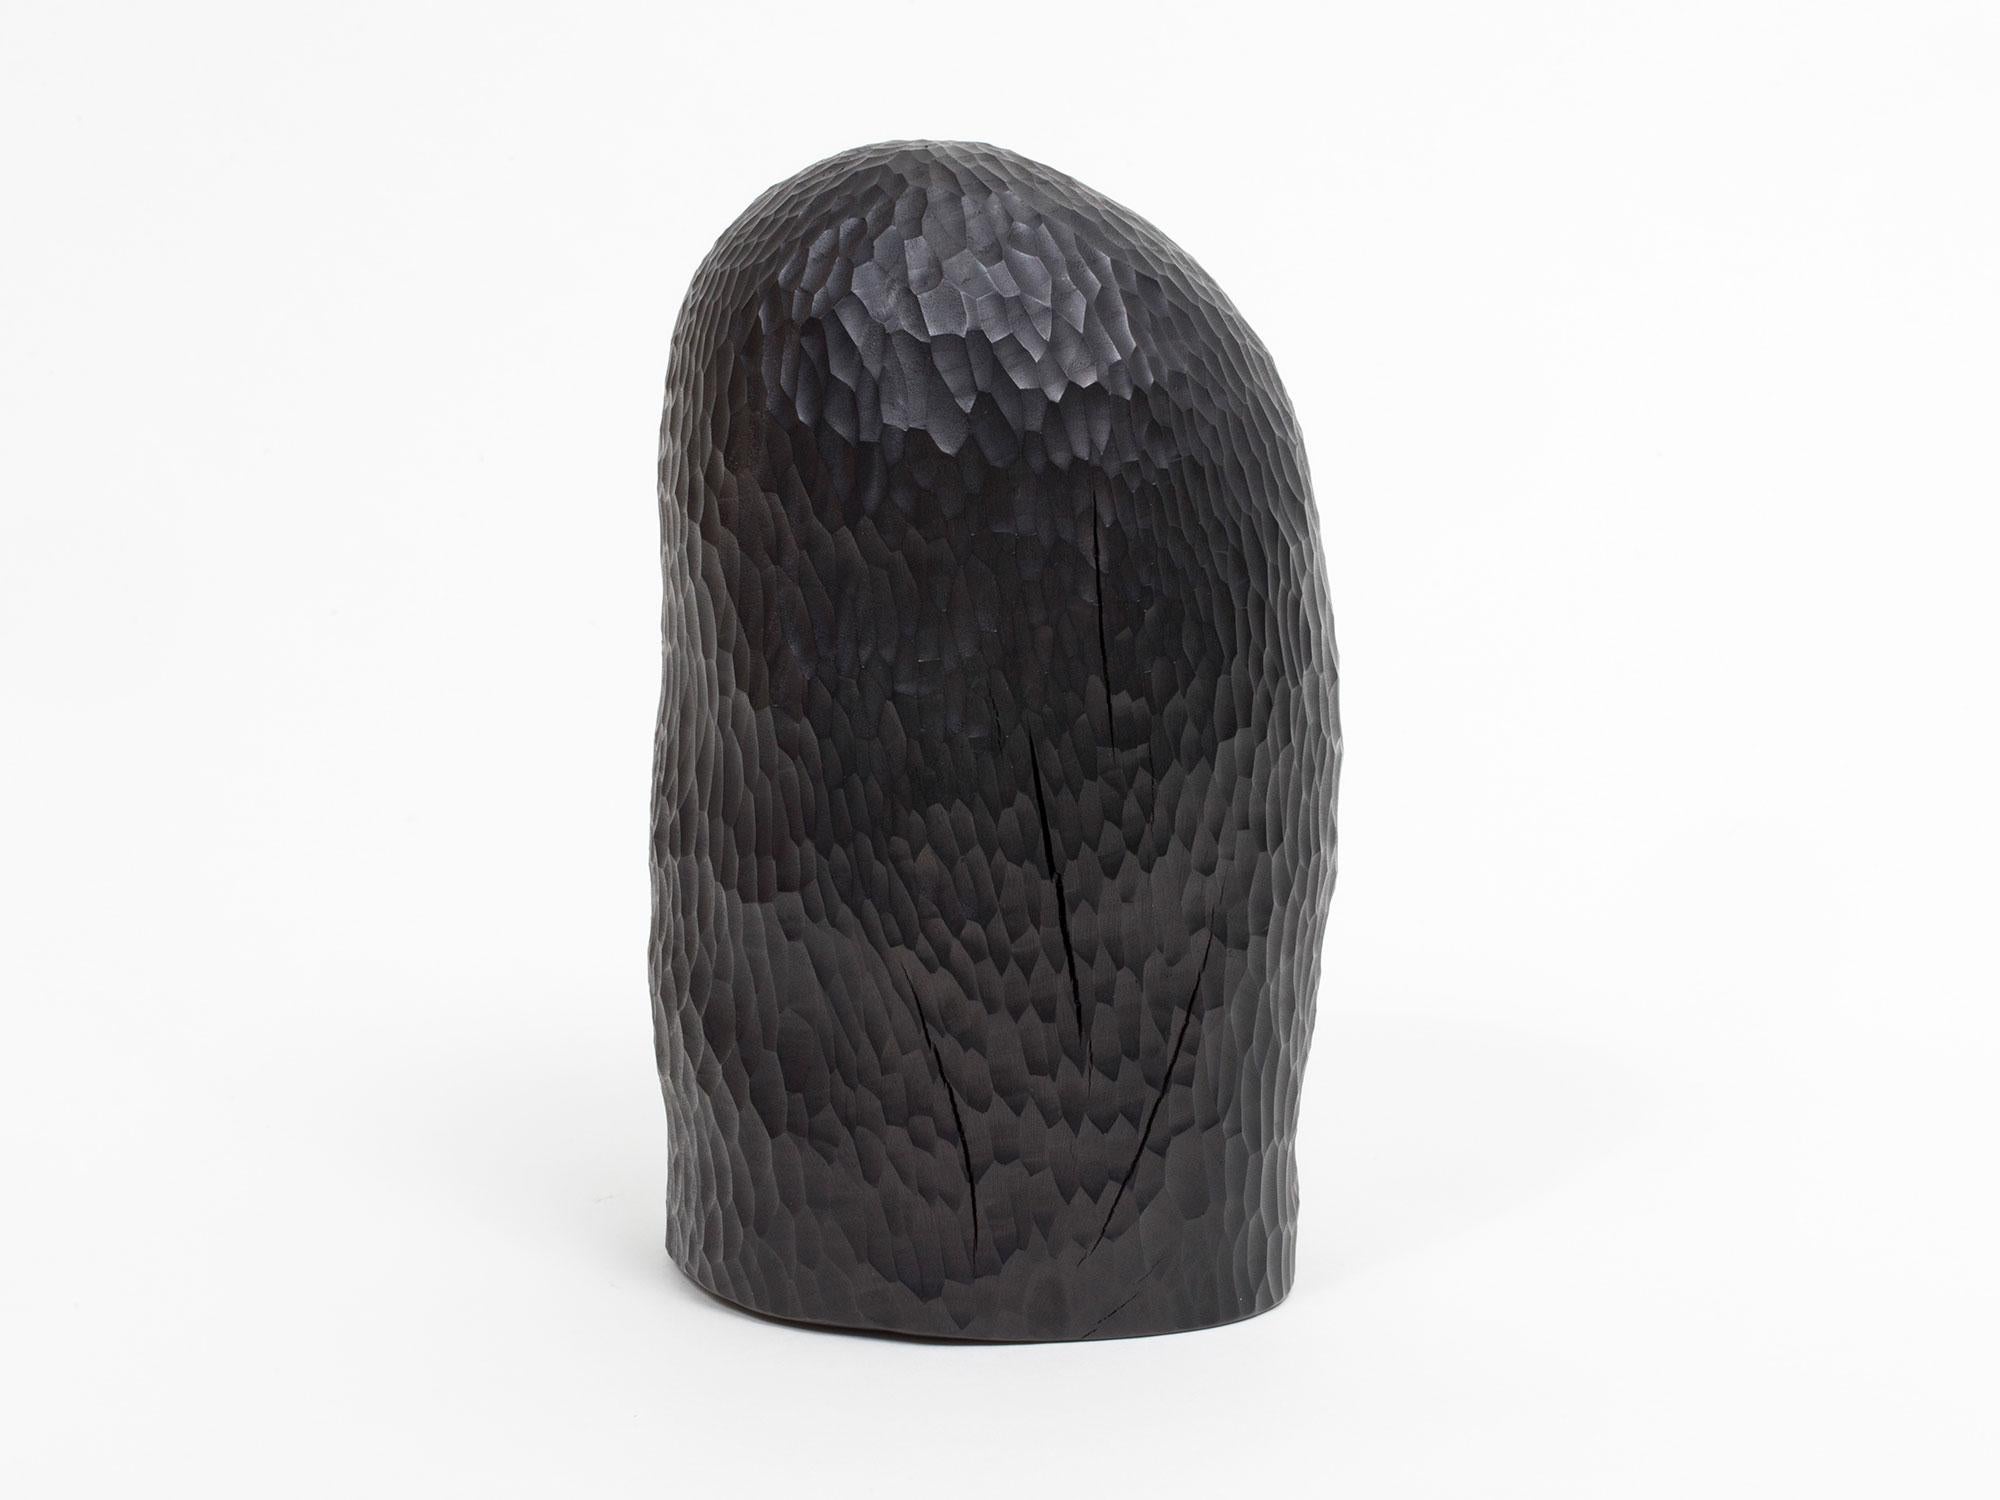 Small hand carved sculpture made of big leaf maple wood with an India ink stain by Oregon based artist Julian Watts.

Julian Watts was born and raised in San Francisco, and now lives and works in Alpine, OR. He has shown work internationally at